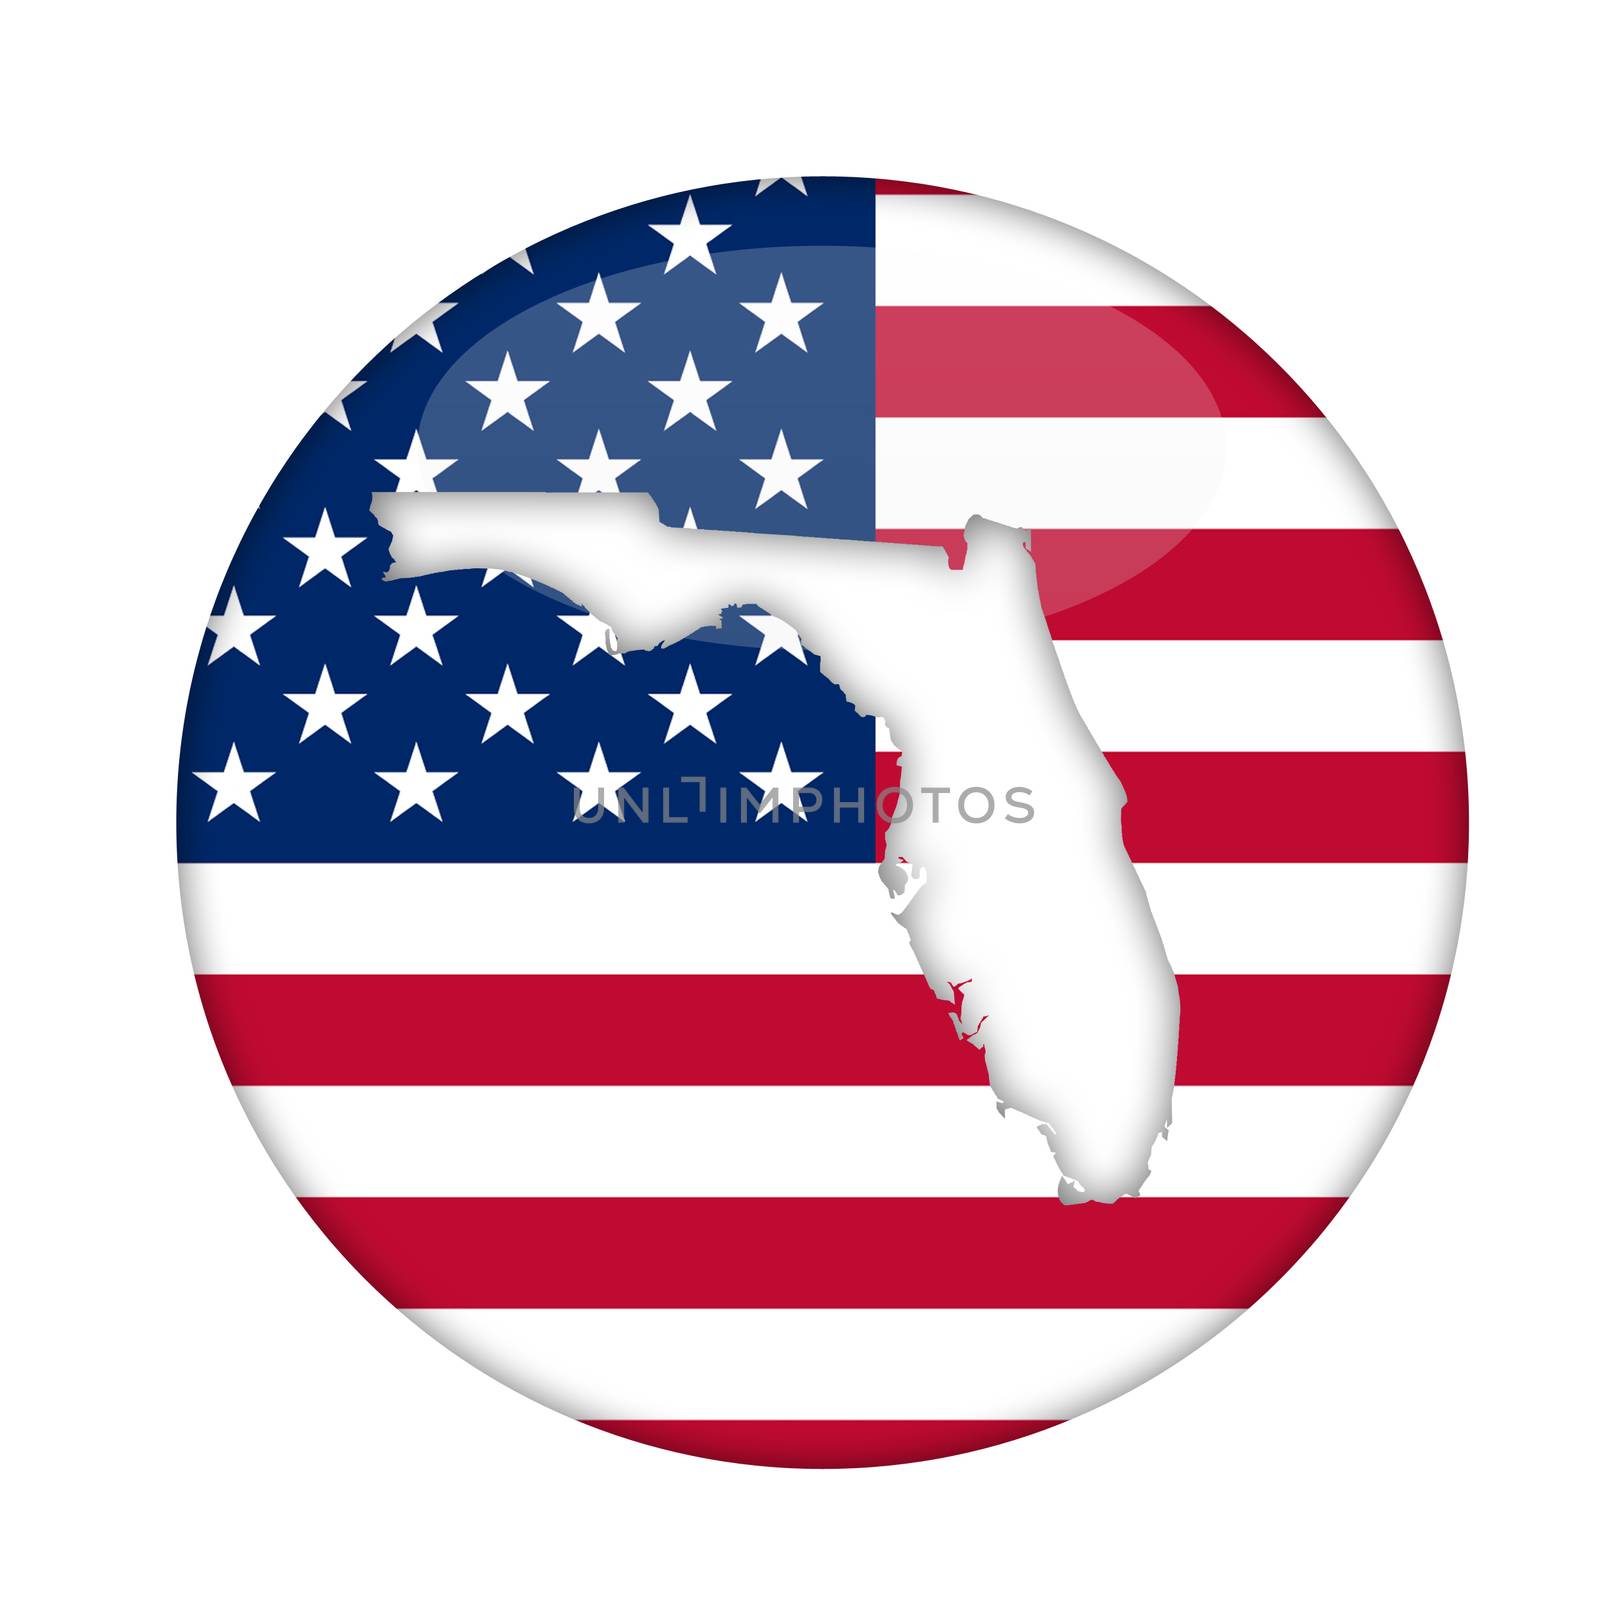 Florida state of America badge isolated on a white background.